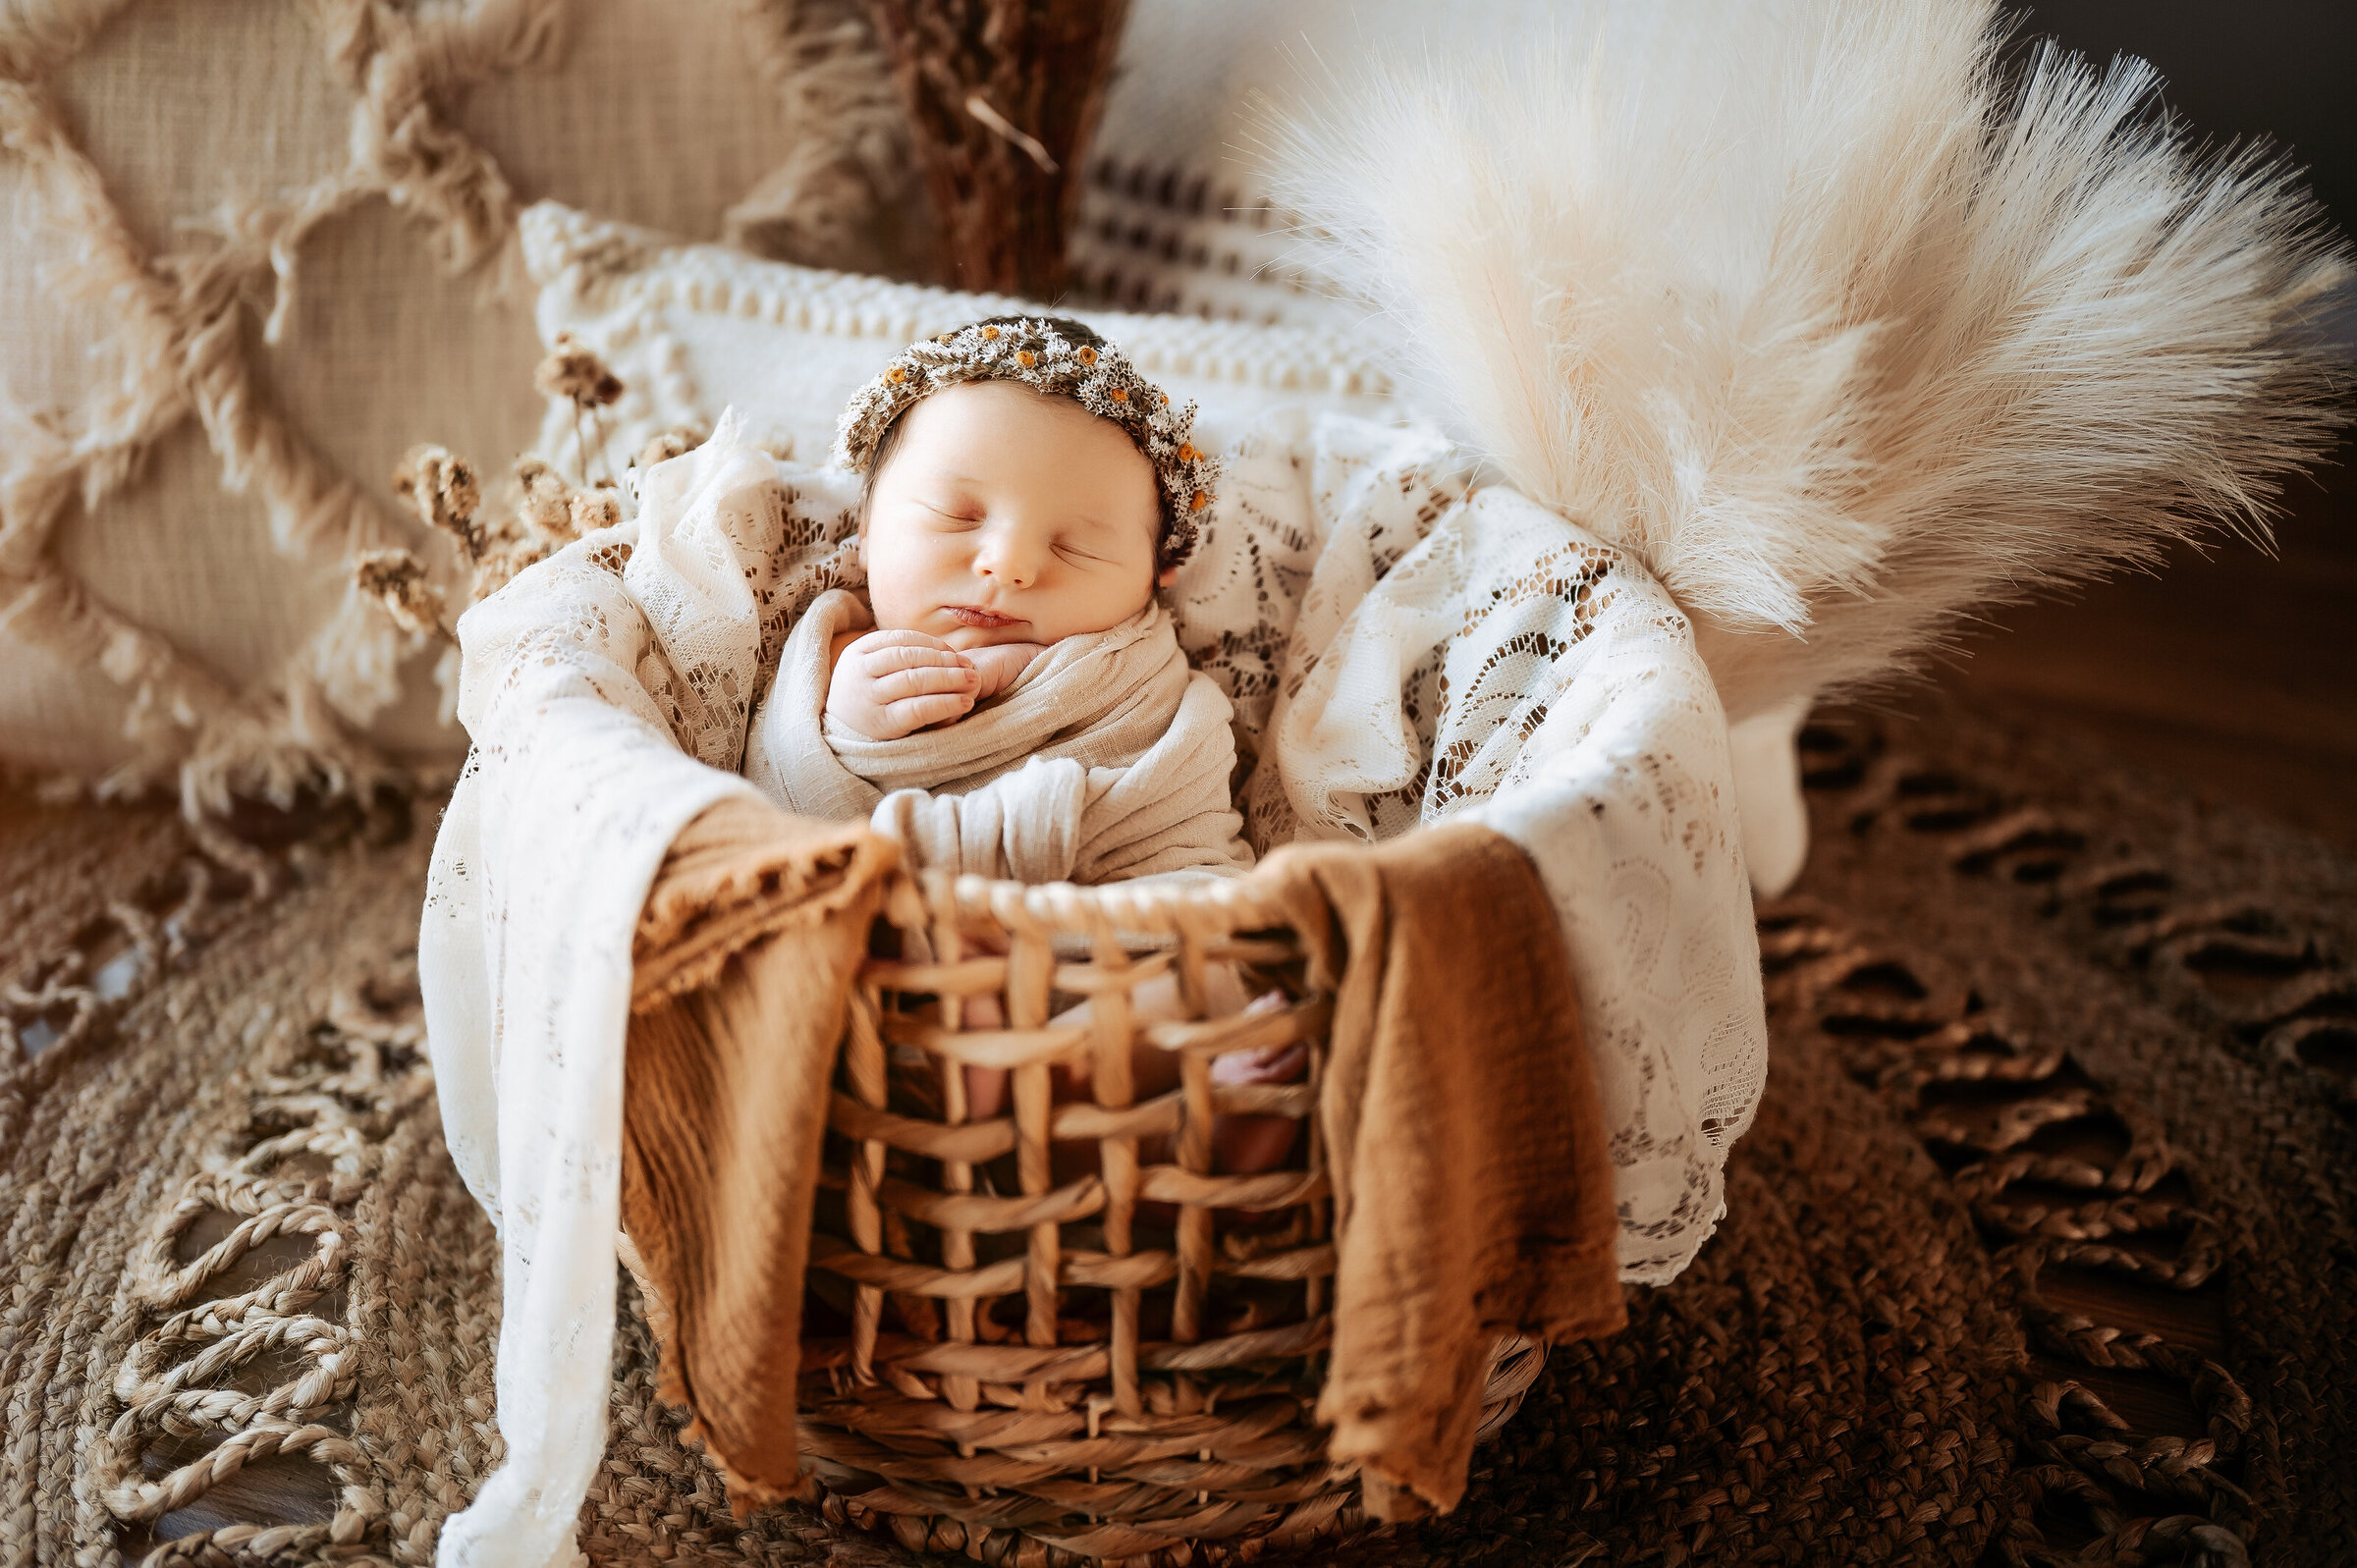 Baby sleeps in wooden crate swaddled with linen and wearing dried wheat headband